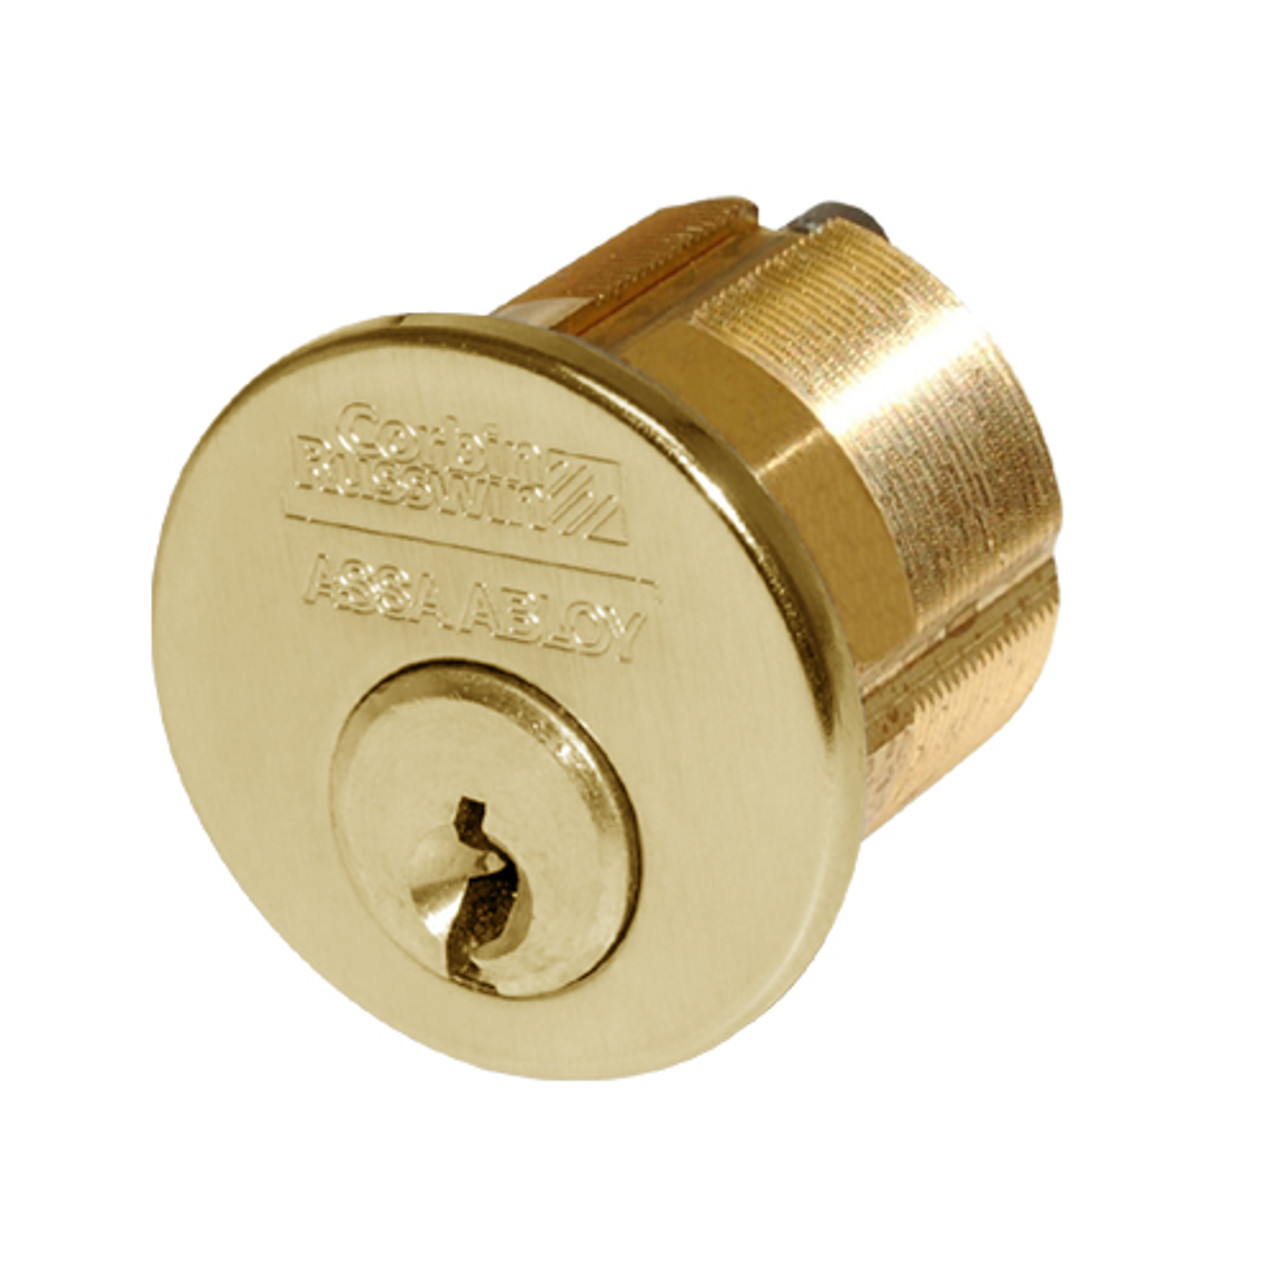 CR1000-200-A02-6-L1-605 Corbin Conventional Mortise Cylinder for Mortise Lock and DL3000 Deadlocks with Straight Cam in Bright Brass Finish